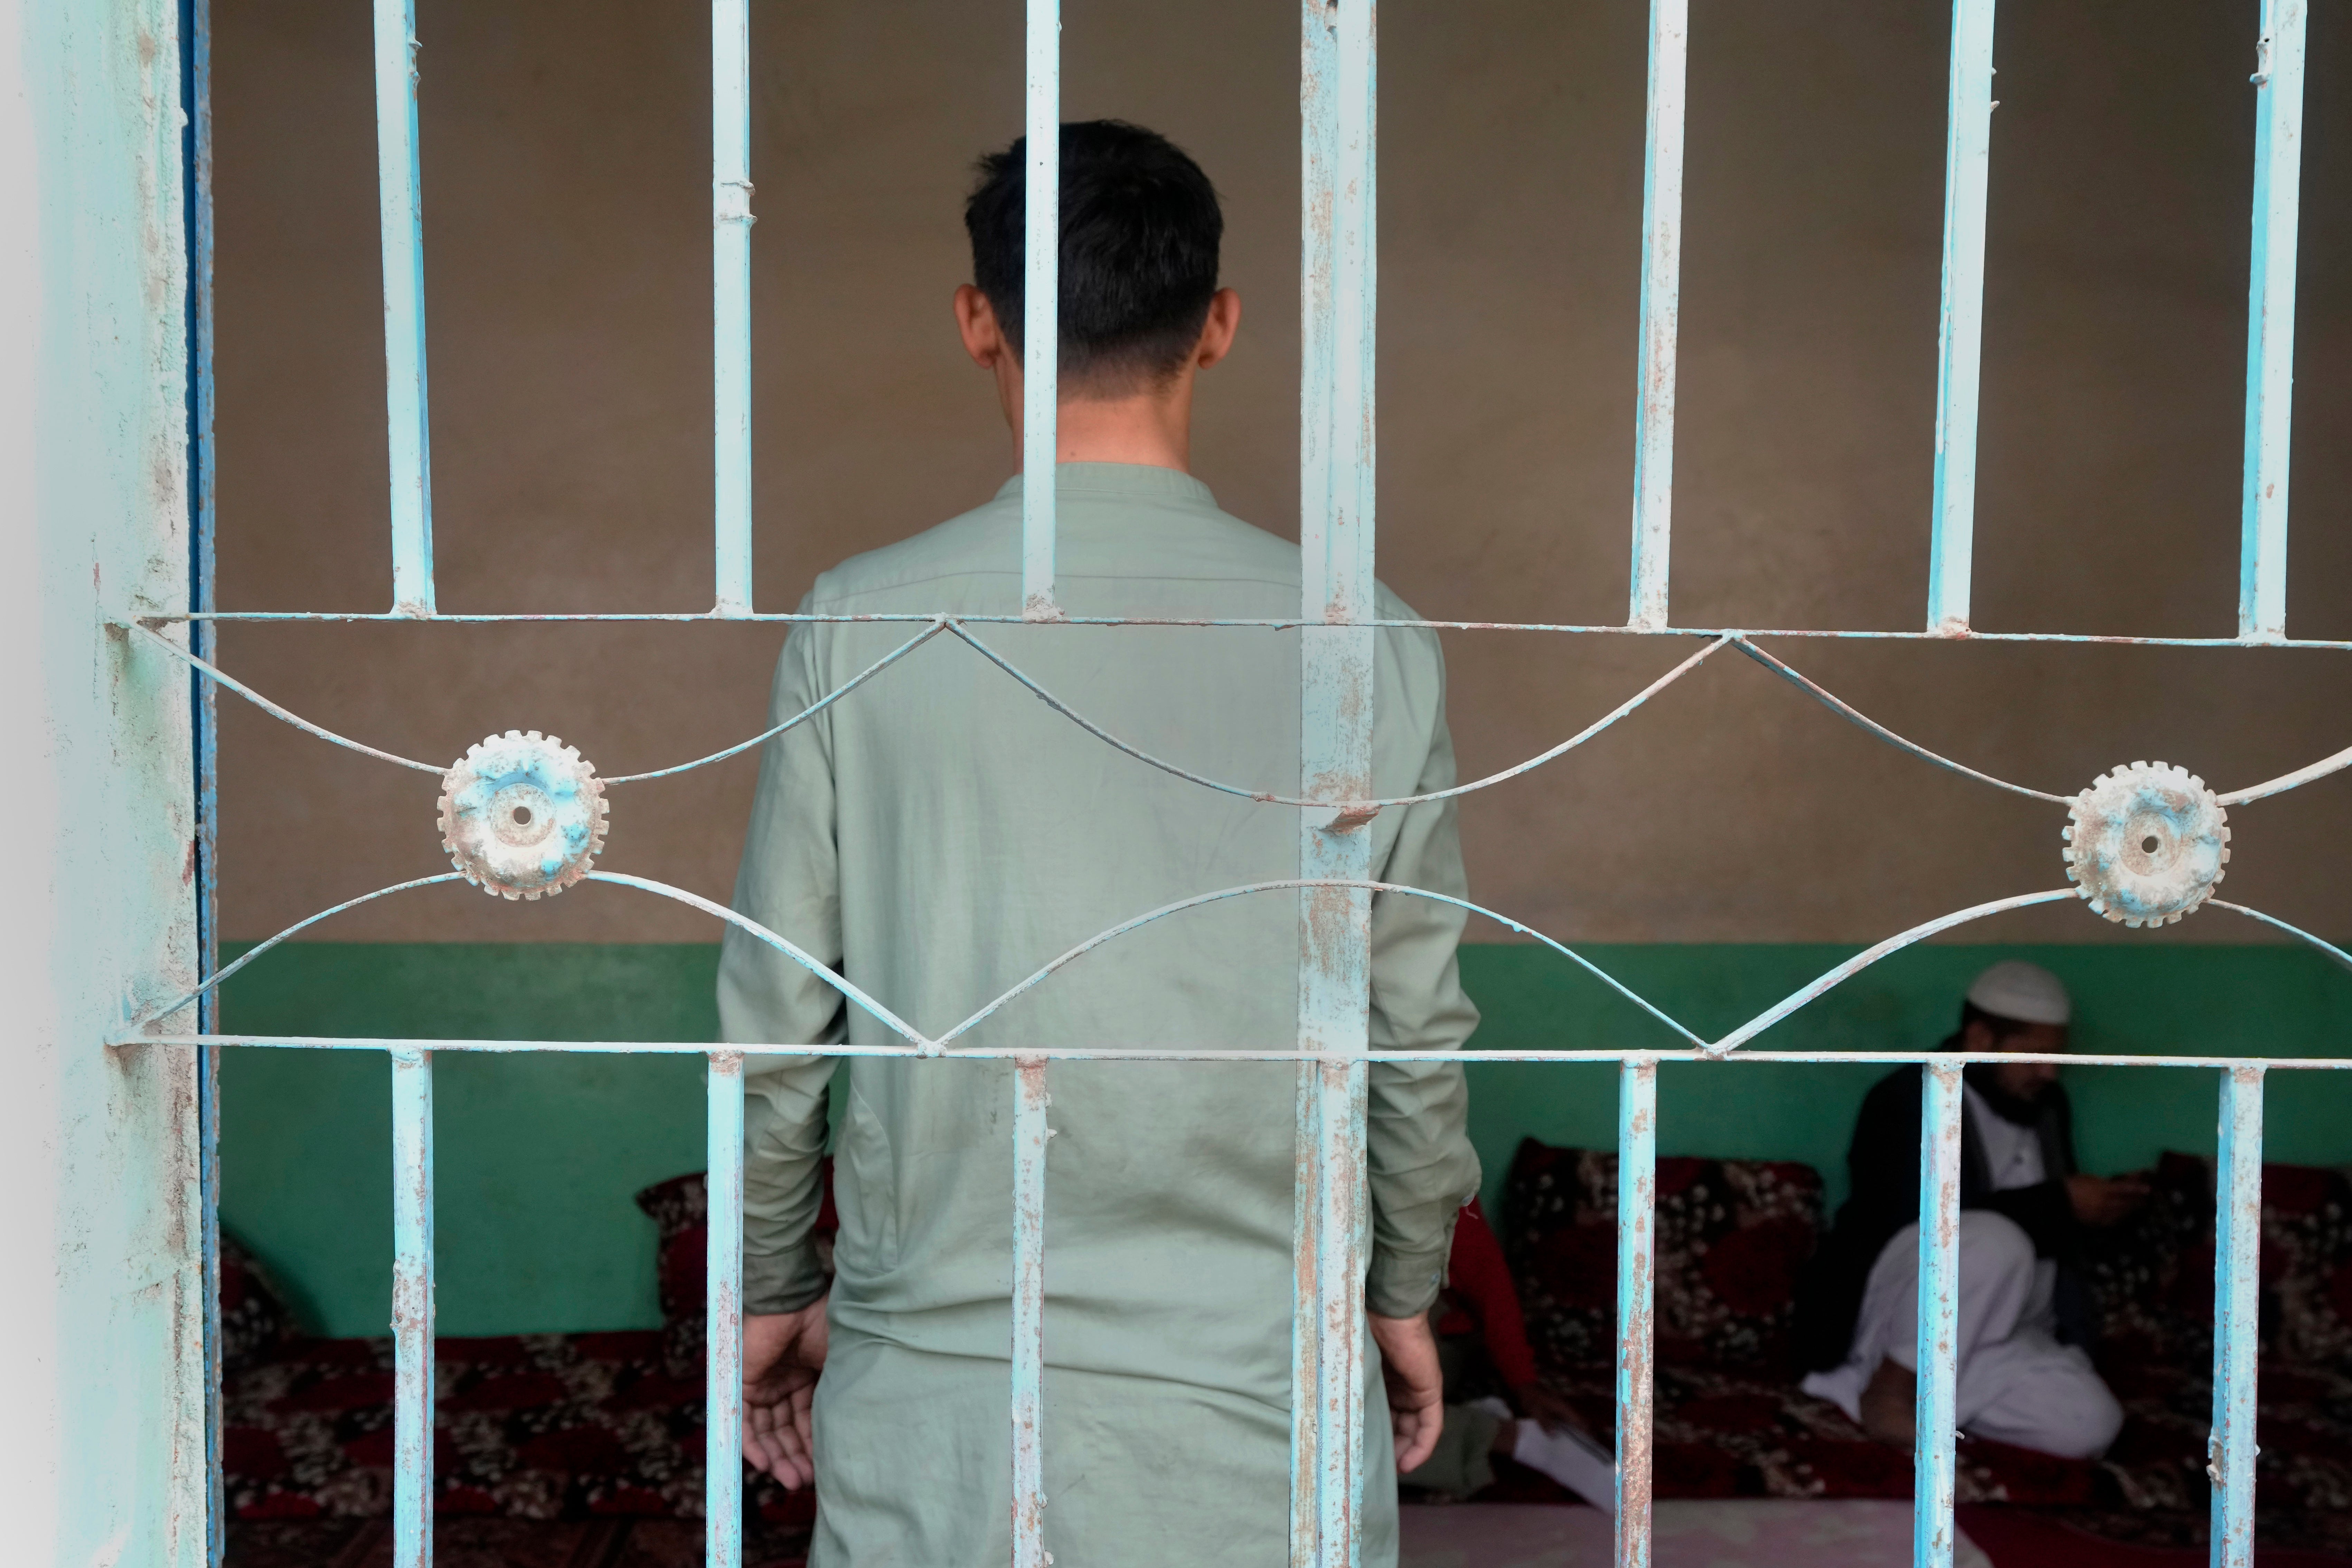 Born and raised in Pakistan to parents who fled neighboring Afghanistan half a century ago, an 18-year-old found himself at the mercy of police in Karachi who sent him to a deportation center